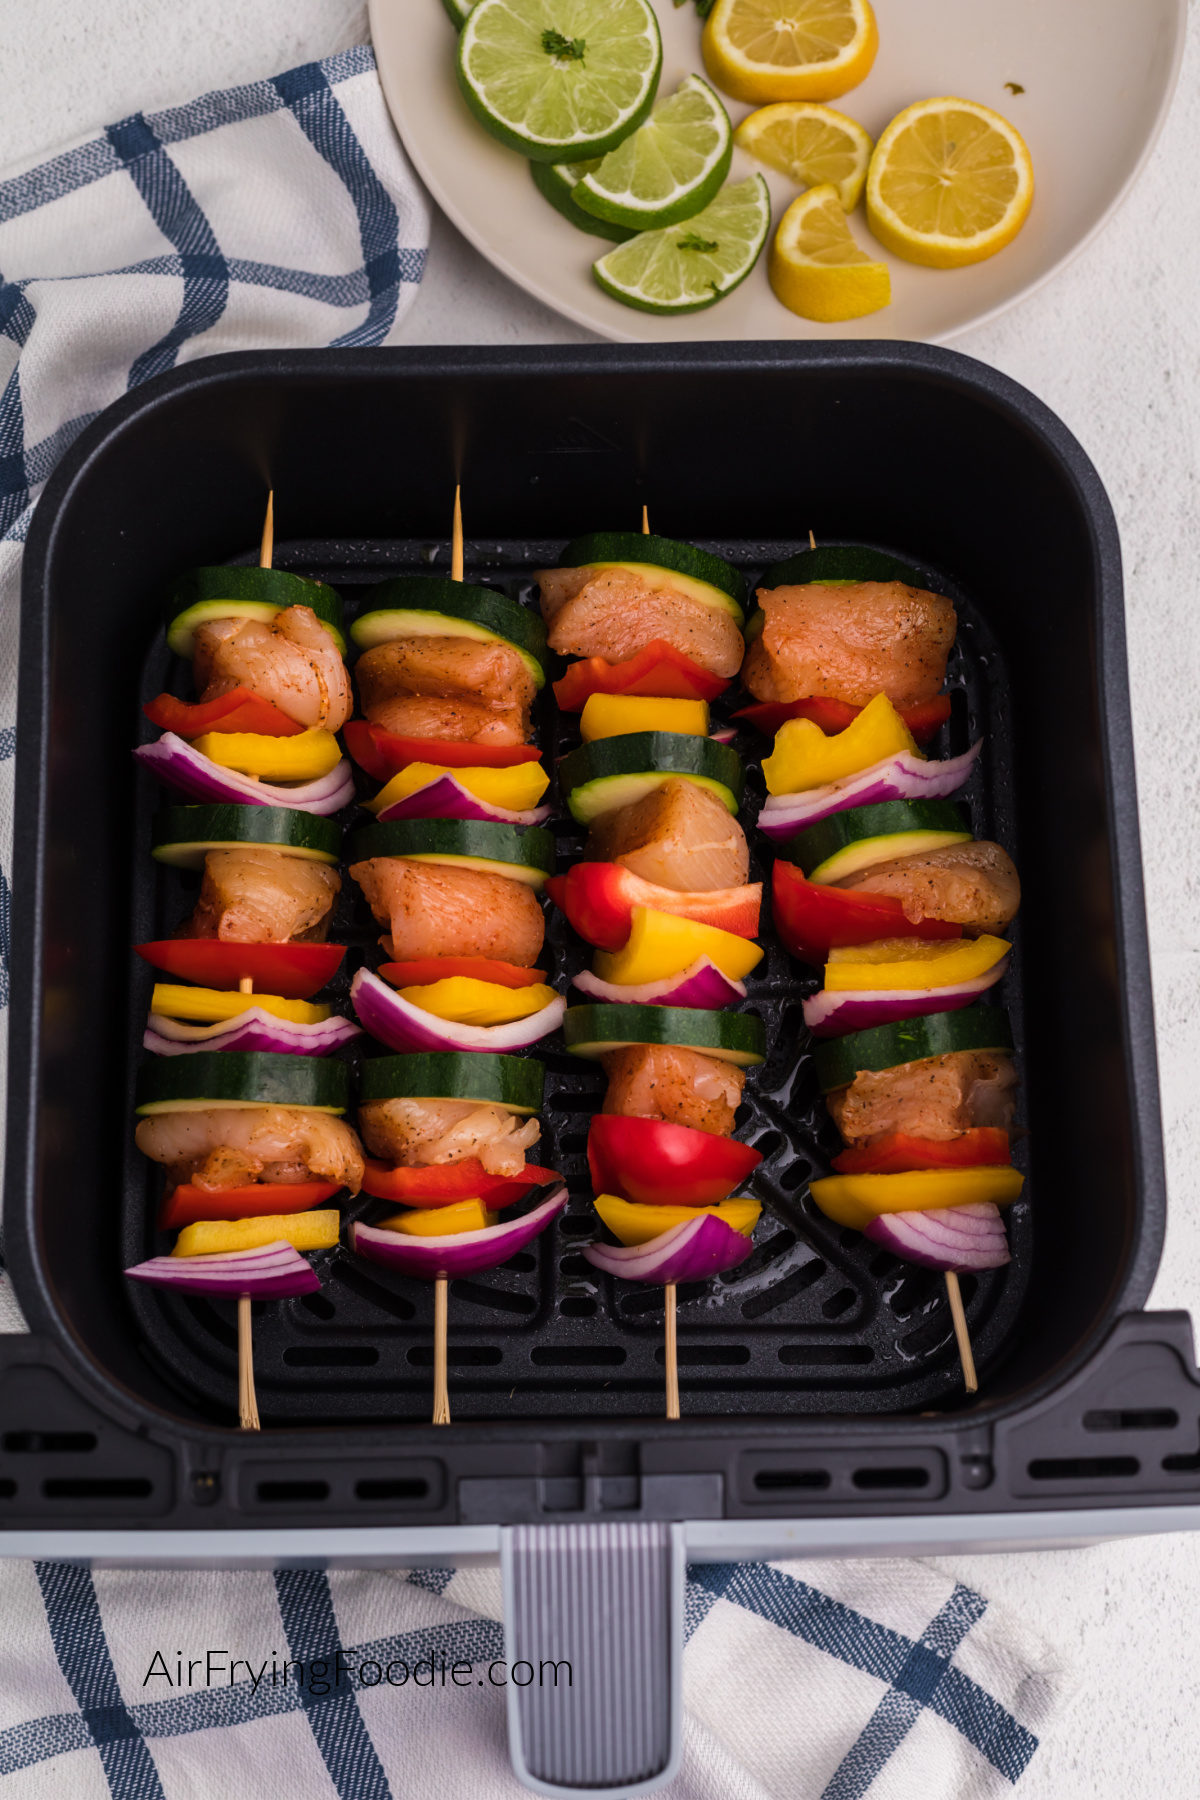 chicken and vegetables rotated on a wooden skewer to make chicken kabobs.